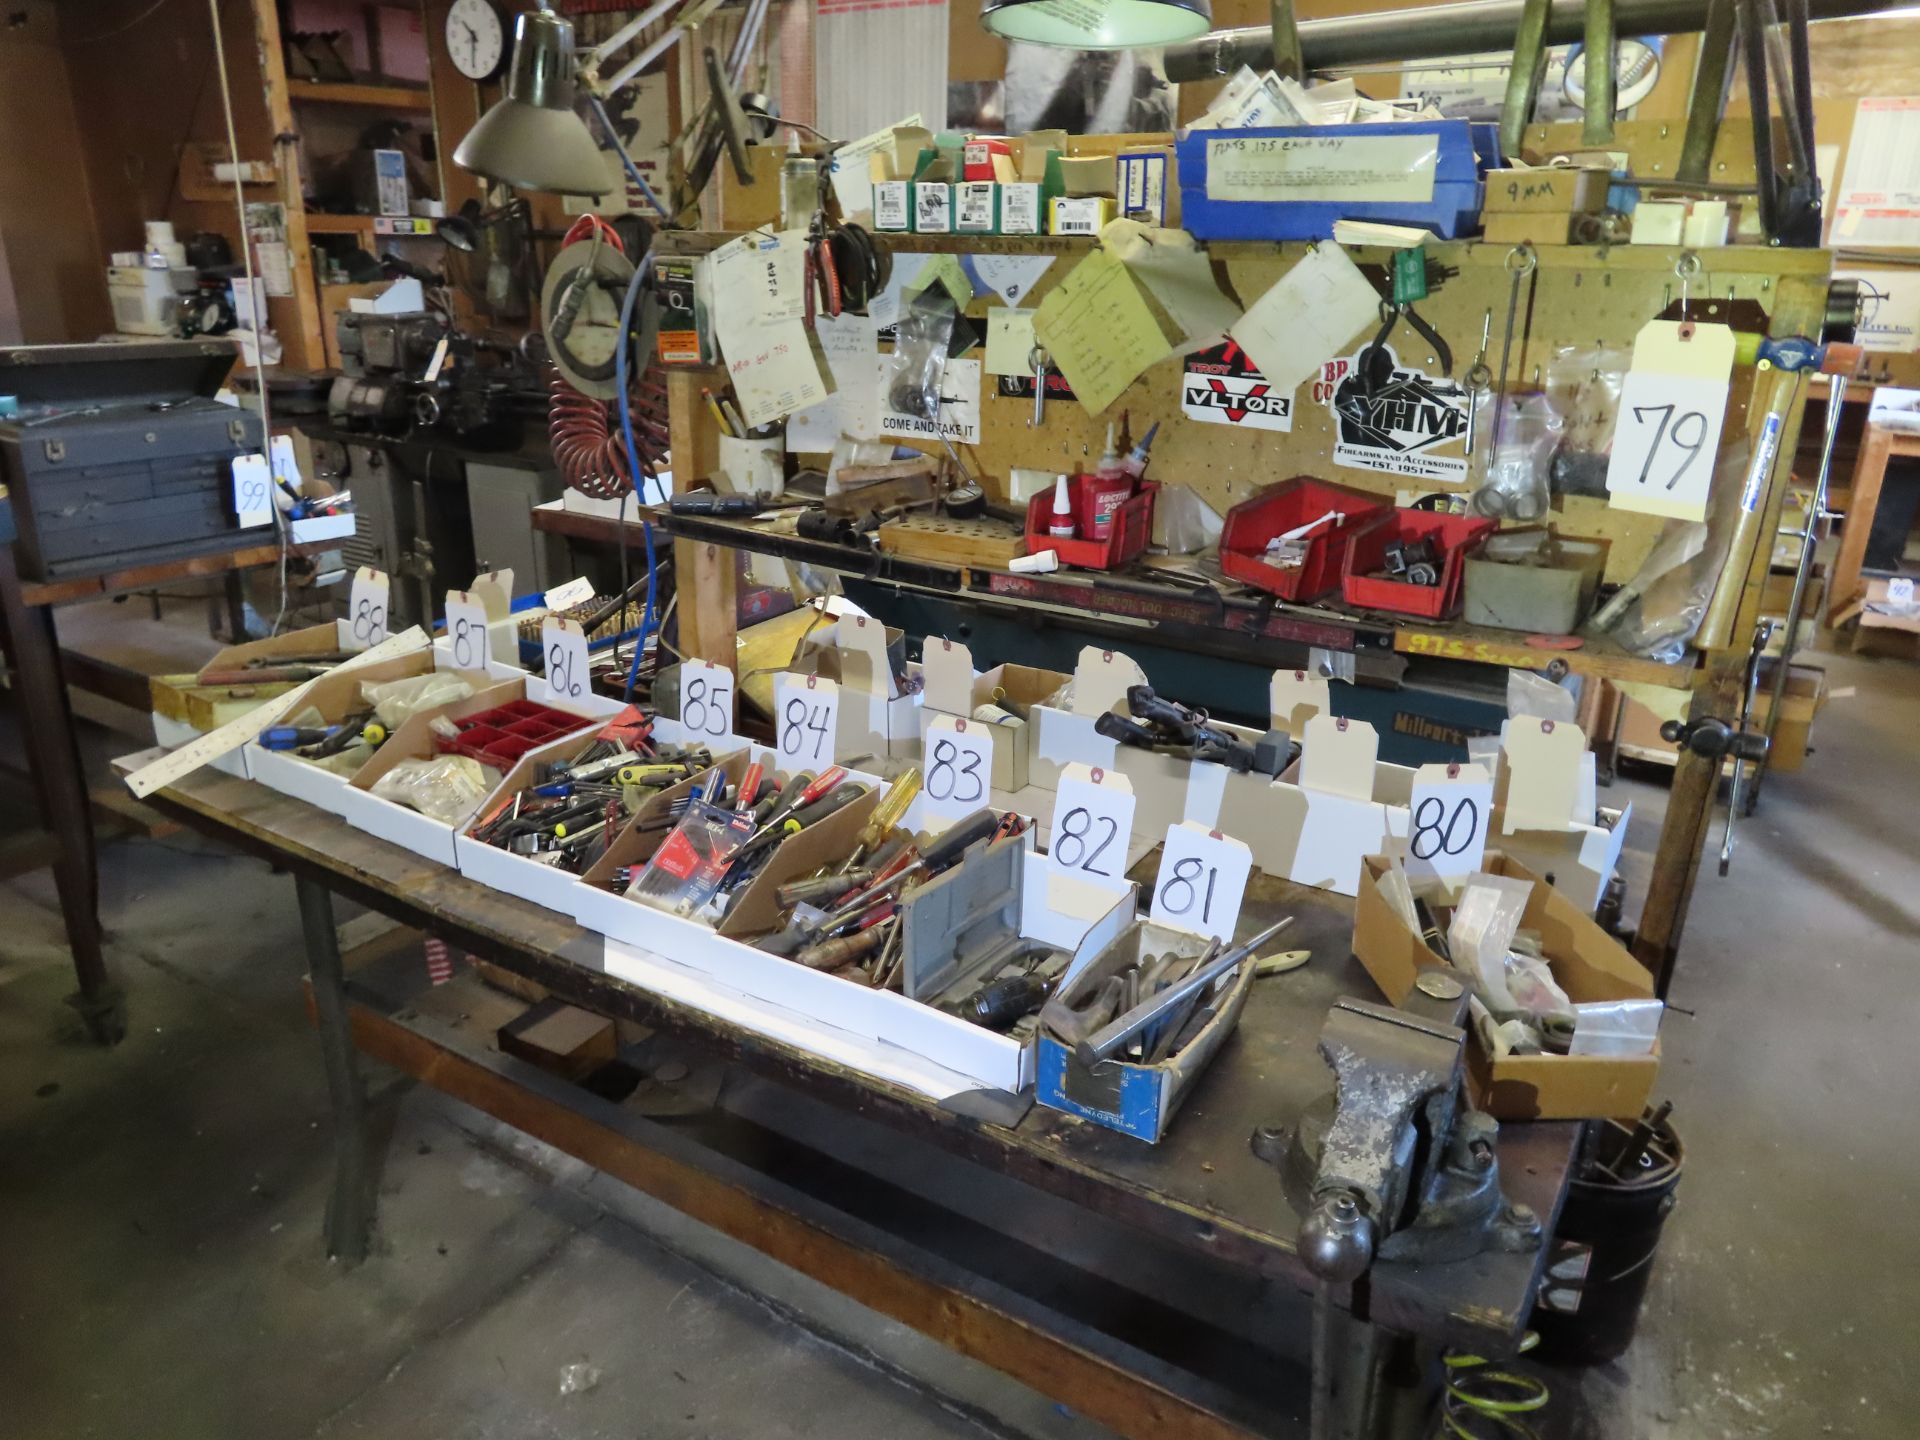 Table w/ Vise & Air Line Hook-ups & Contents of Upper Peg Board - Image 4 of 6